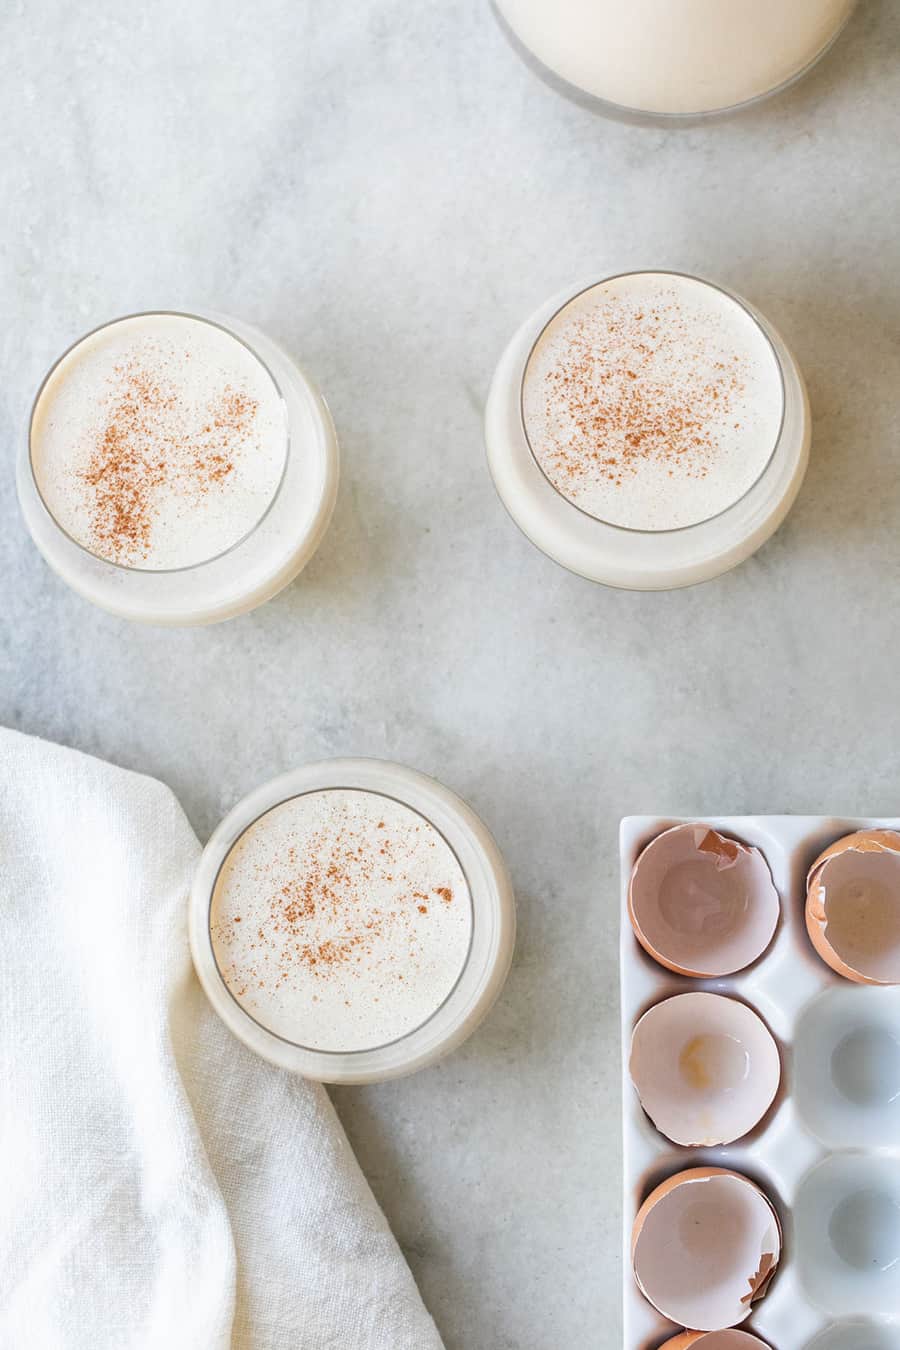 Christmas cocktail recipe with bourbon and cinnamon - spiked eggnog, spiced rum